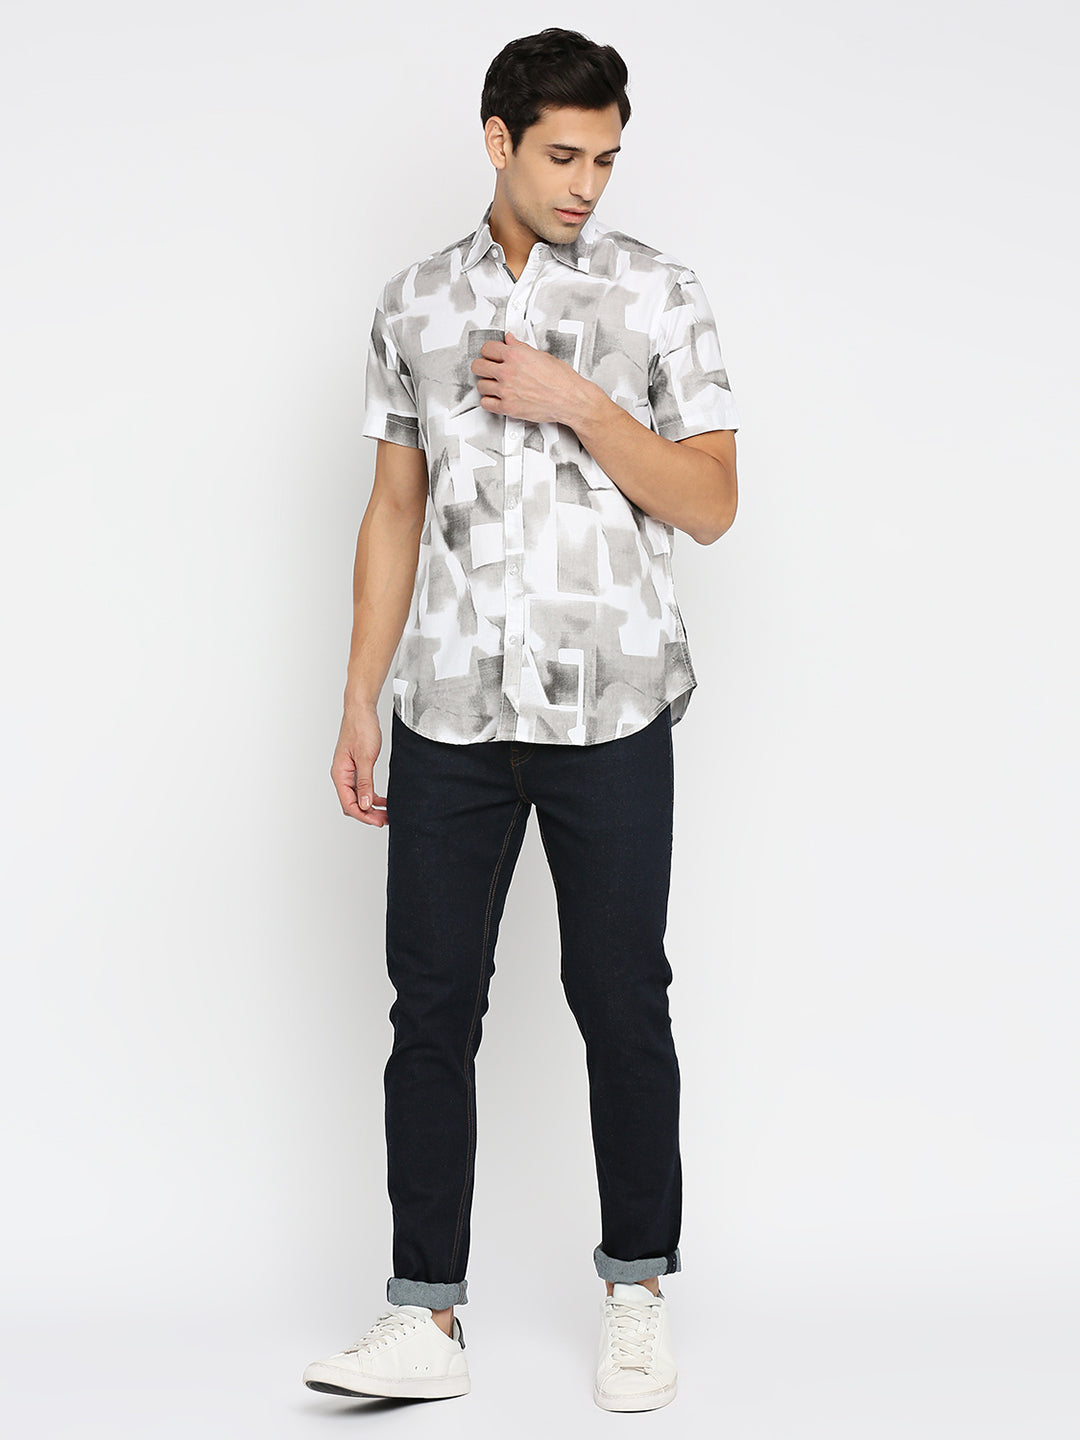 Absolute Modal Cotton Black Abstract Slim Fit Shirt